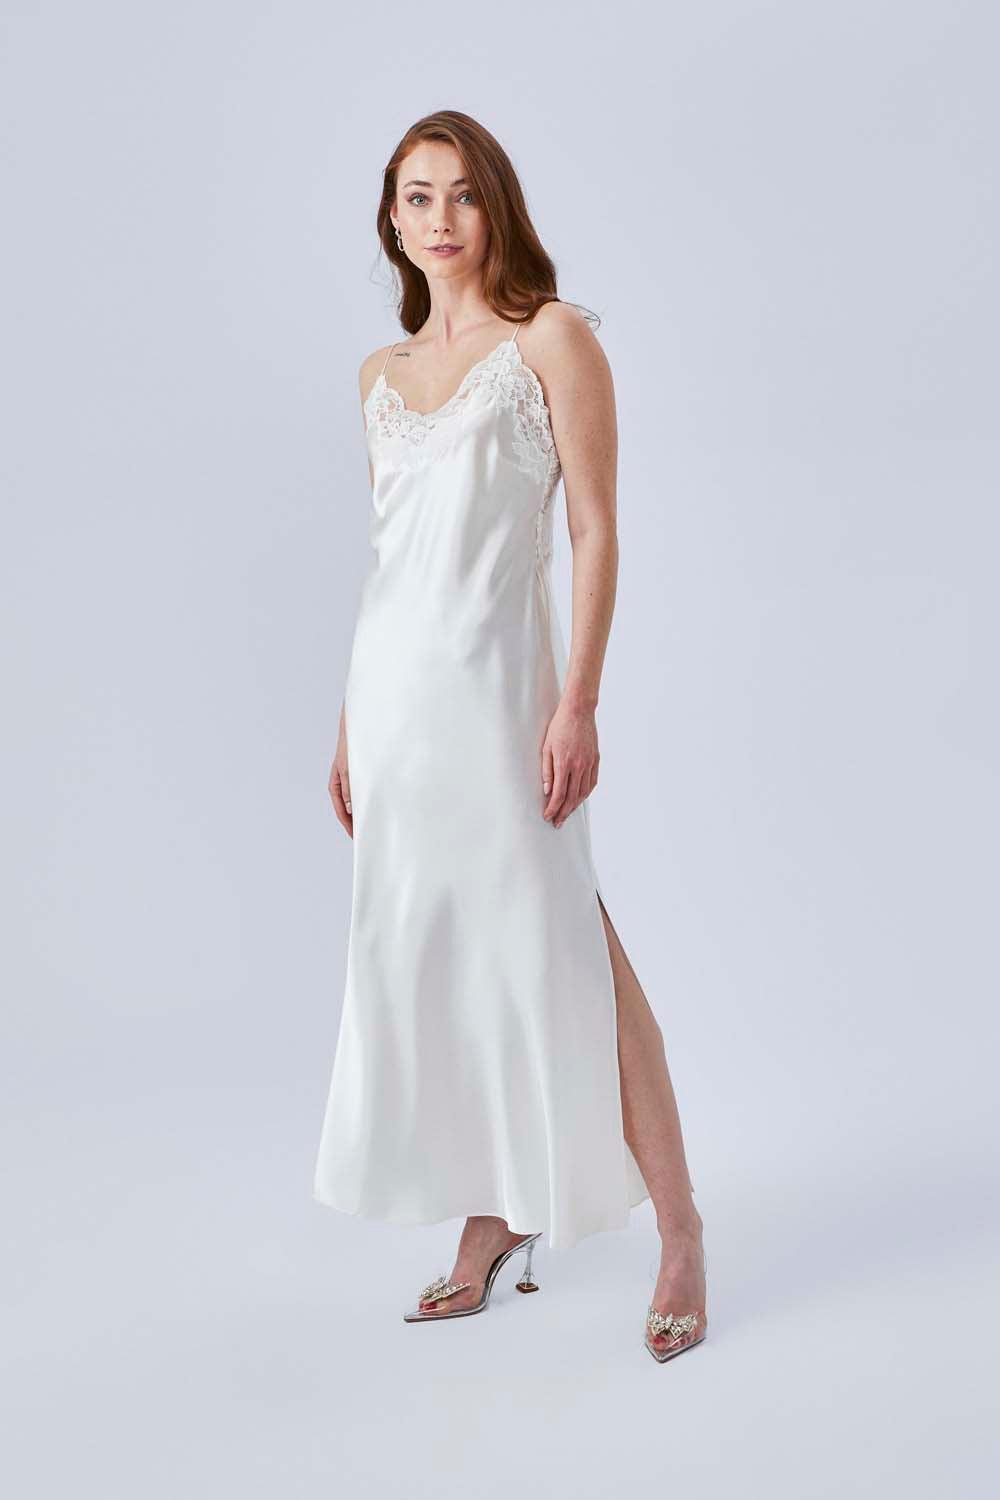 Rena - Long Silk Sateen Strapped Nightgown - Off White - Bocan